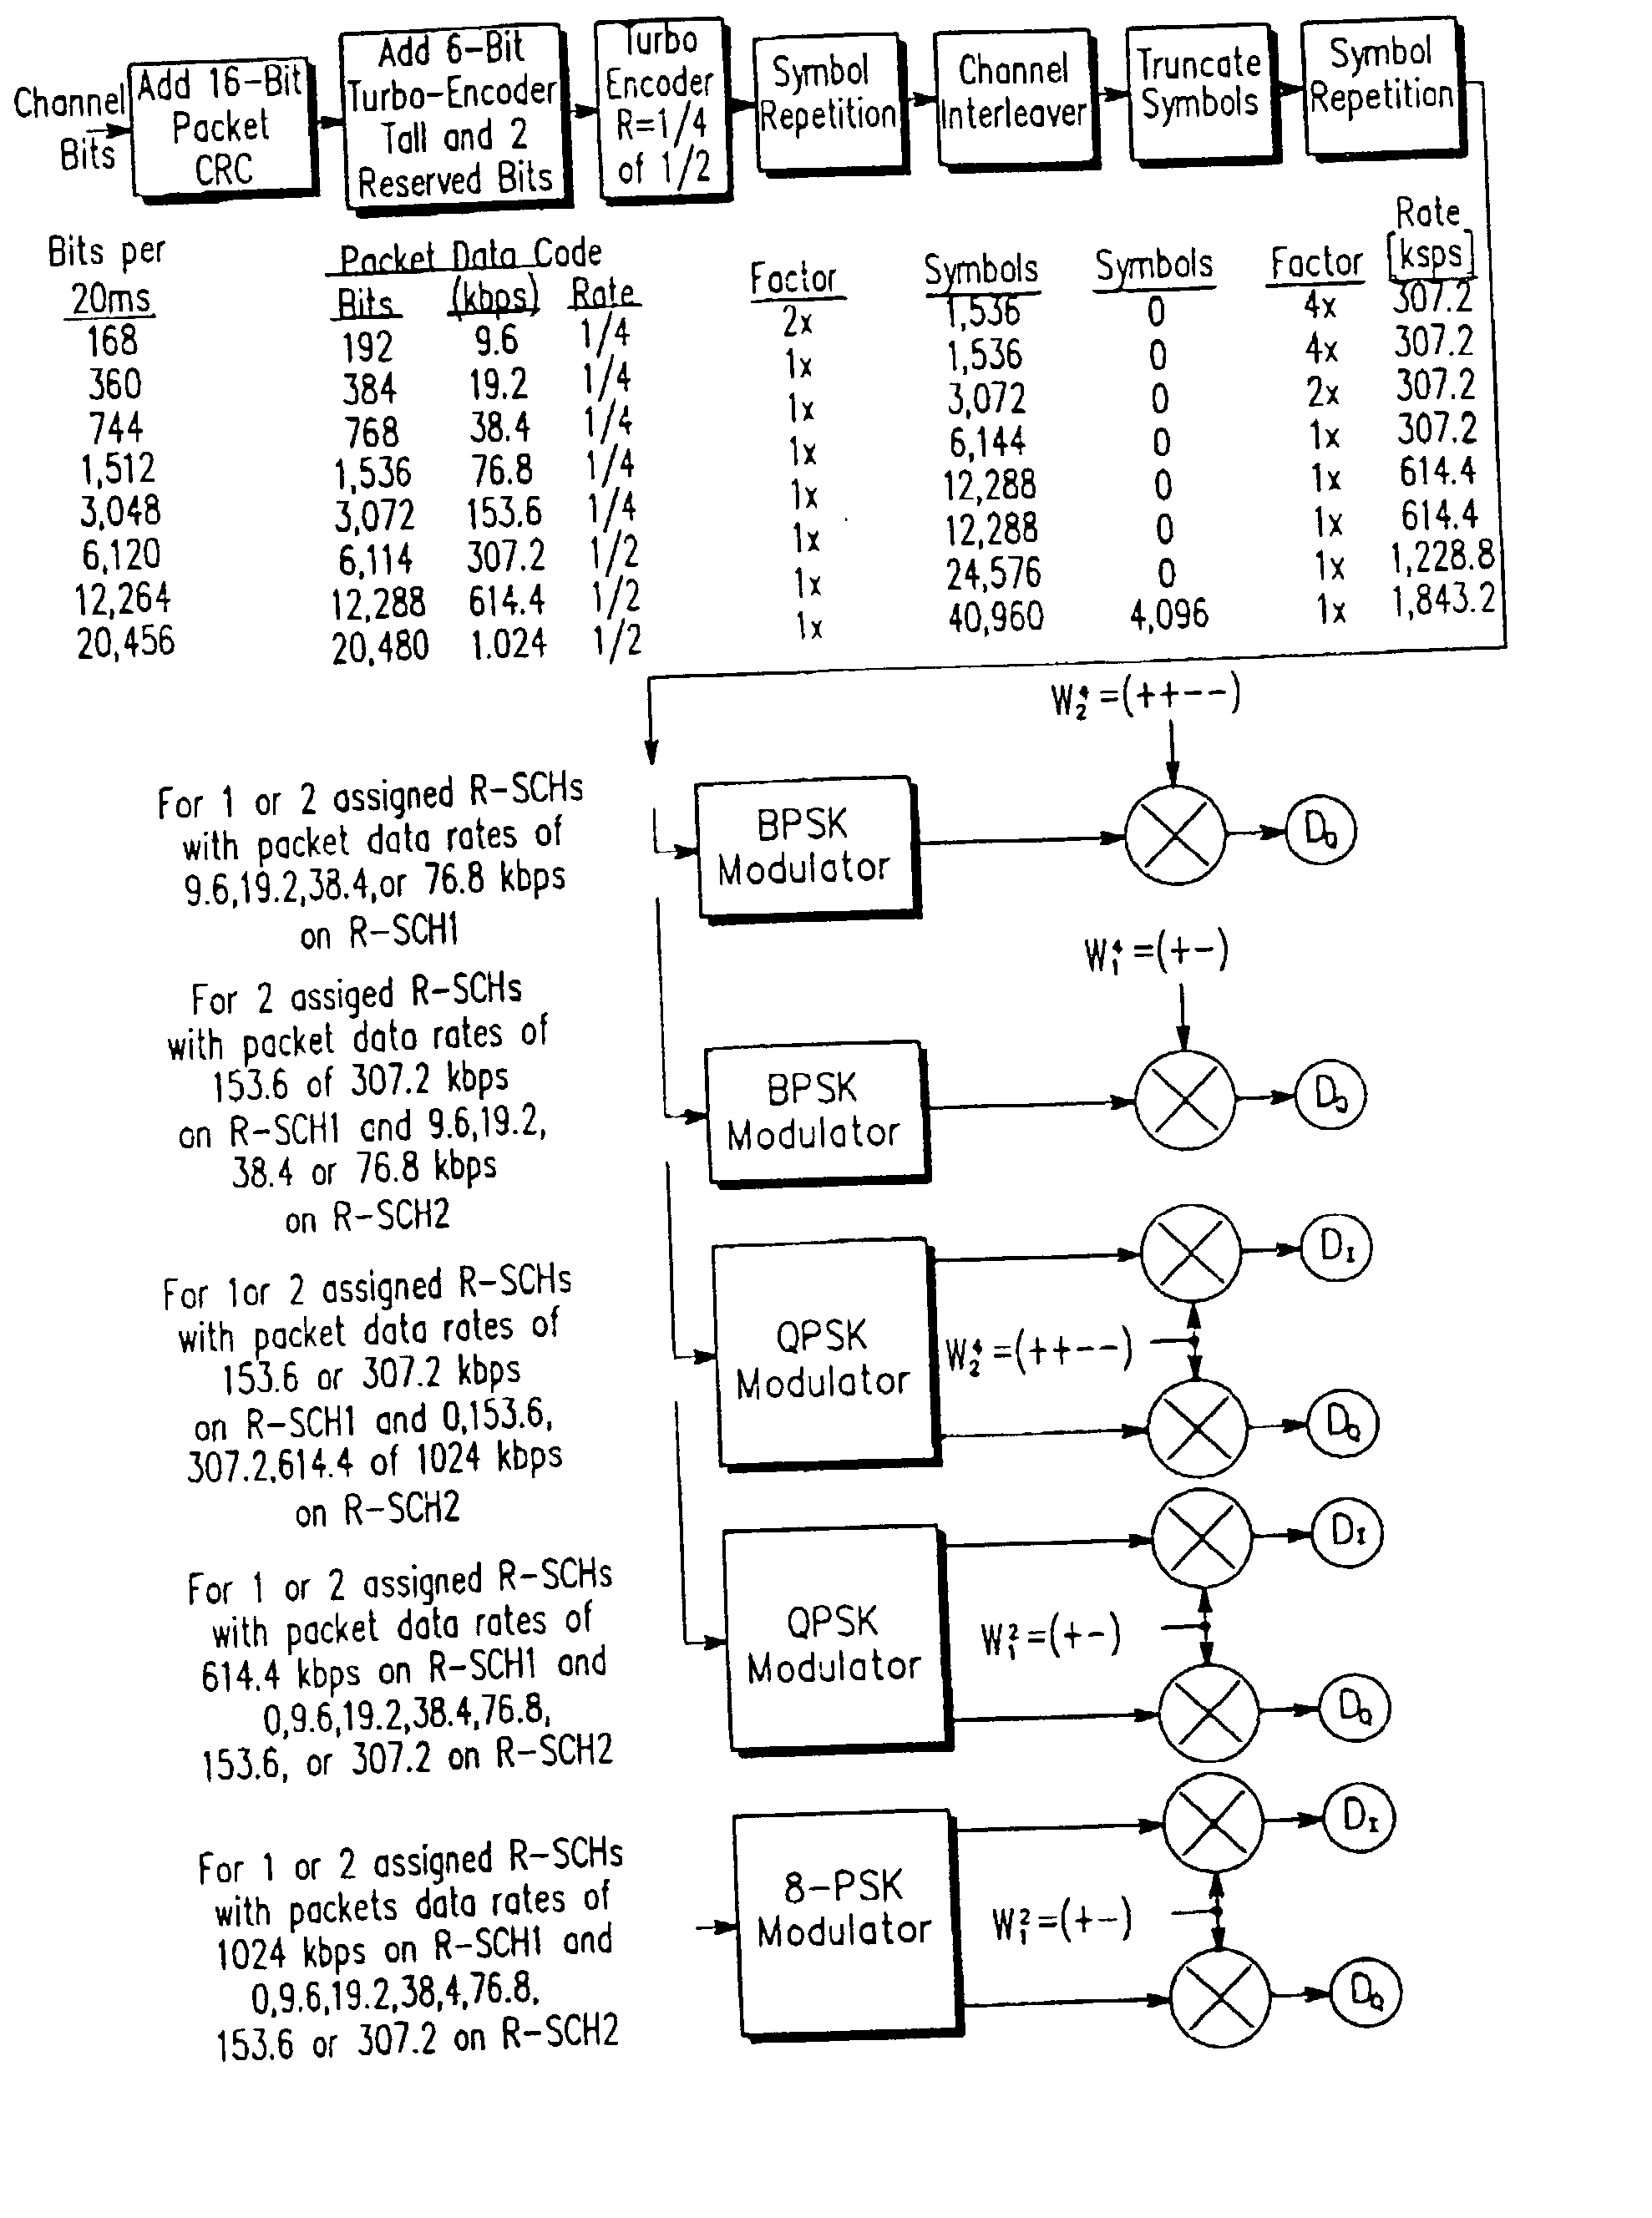 Reverse transmission apparatus and method for improving transmission throughput in a data communication system